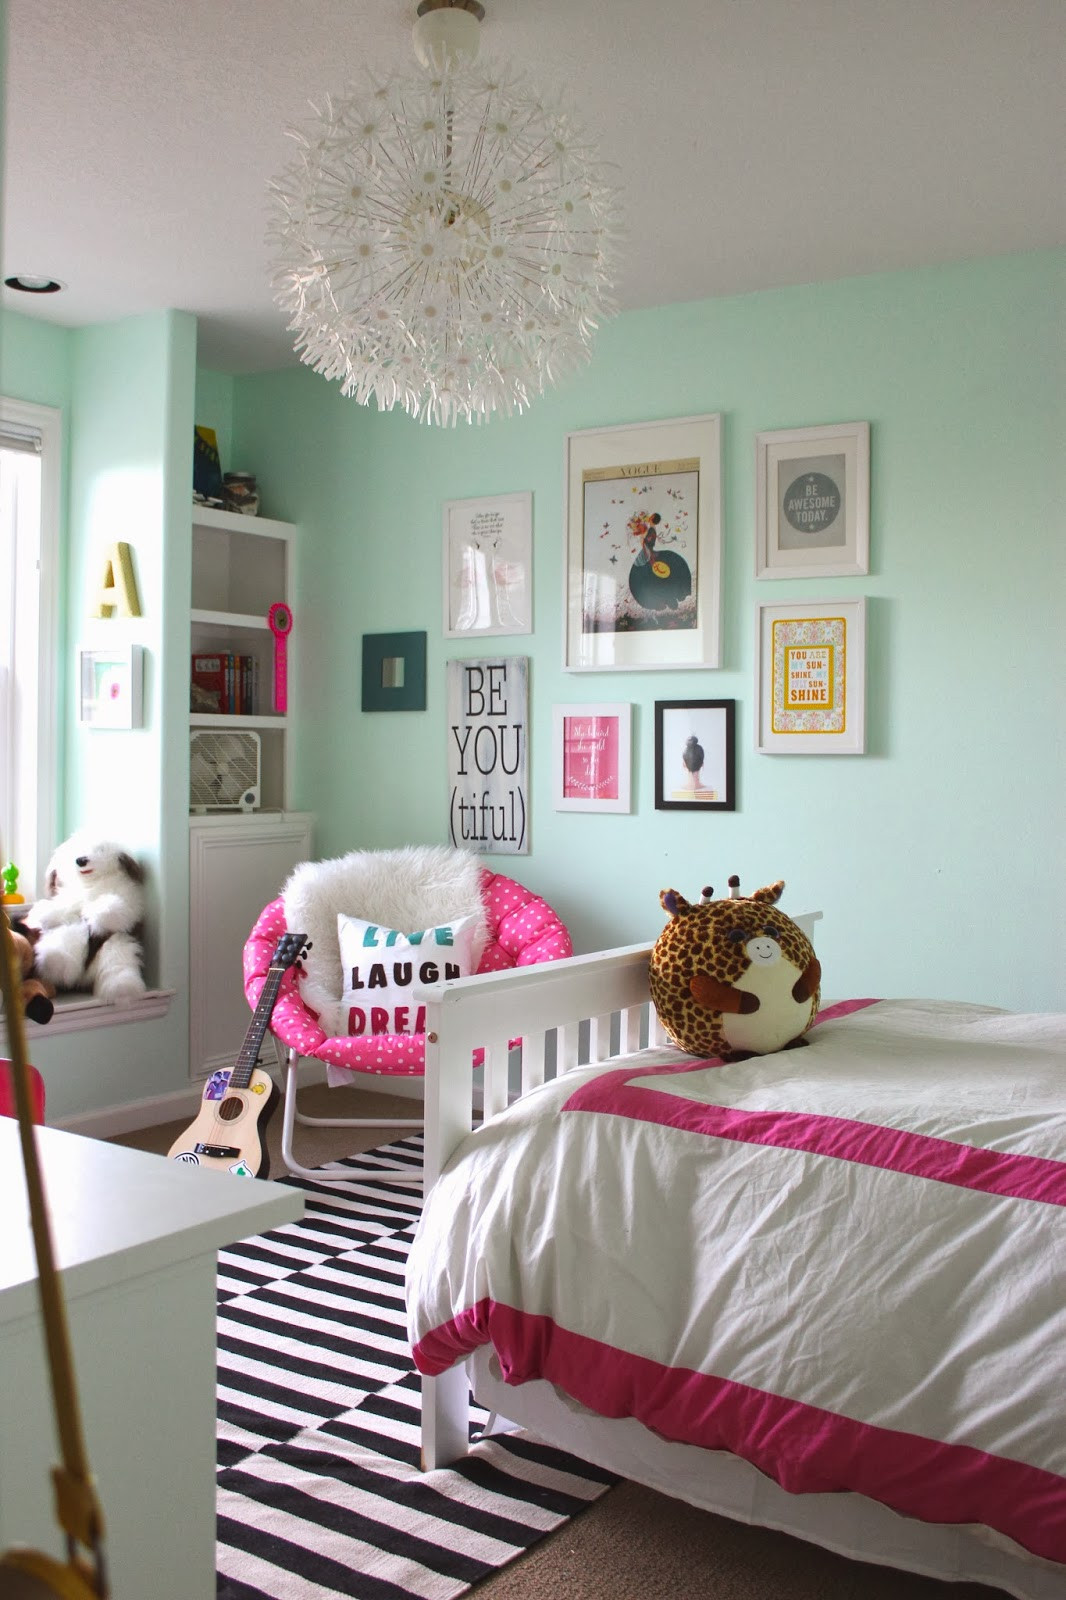 Room Decor Ideas For Tweens
 A room fit for a tween